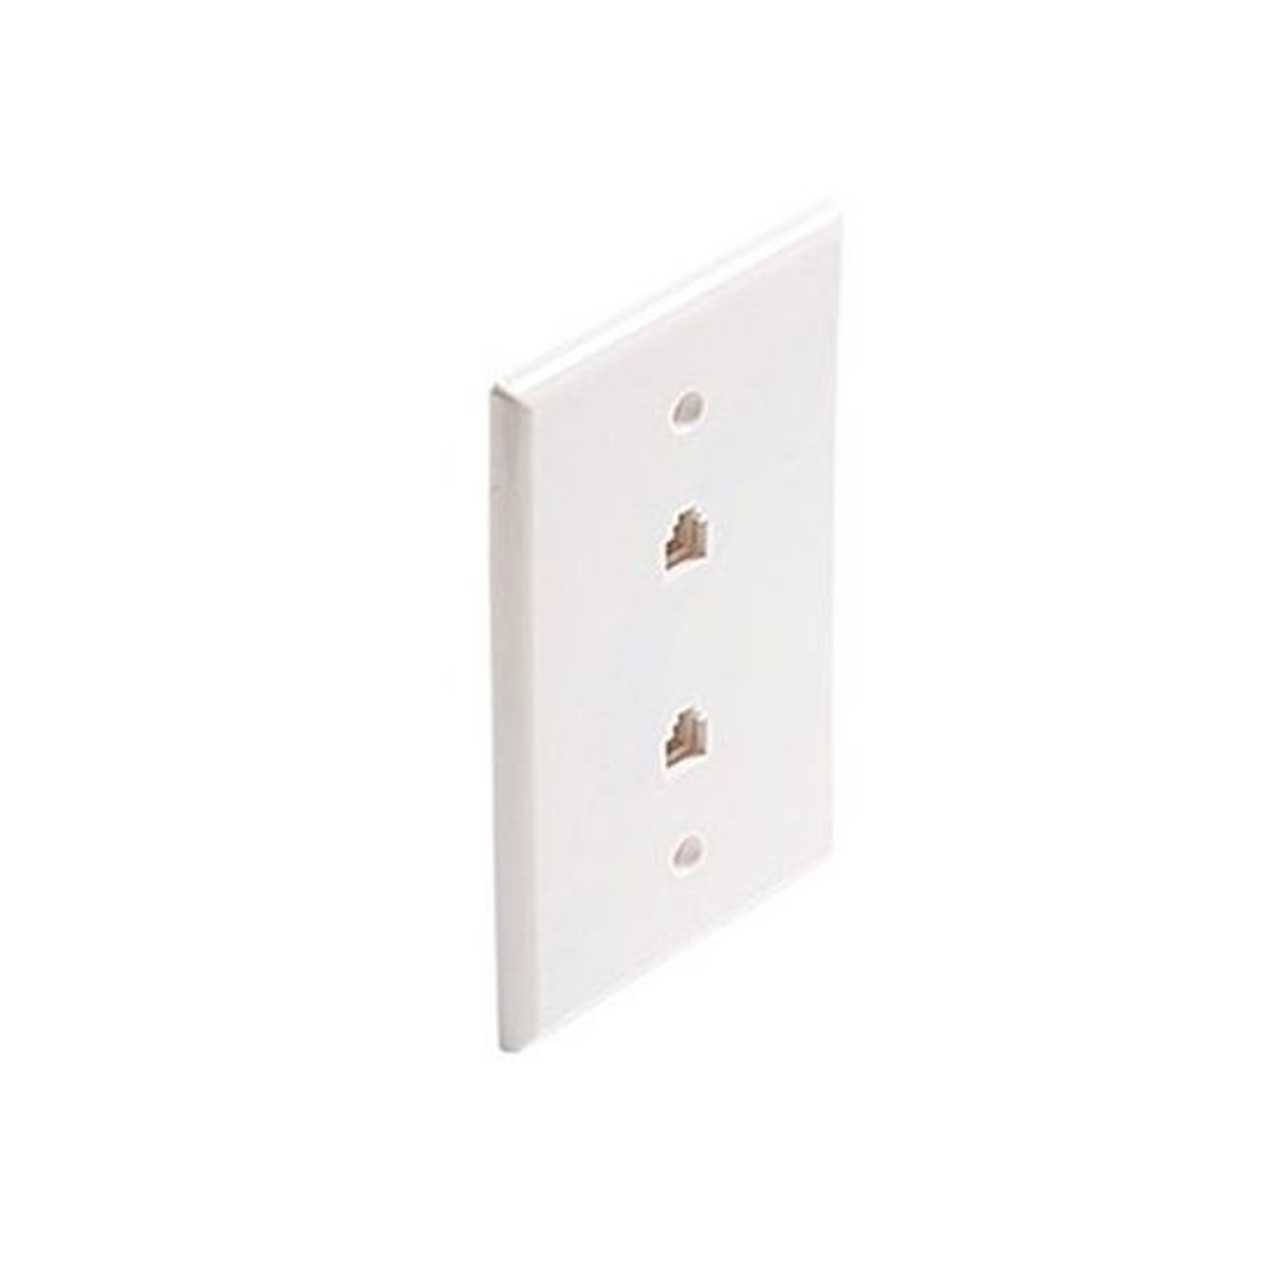 Eagle Dual Telephone Wall Plate White RJ12 6 Conductor Wire Jack 2 Port Decora Duplex Flush Mount Modular Double Data Line Twin Outlet Plug Jack Cover